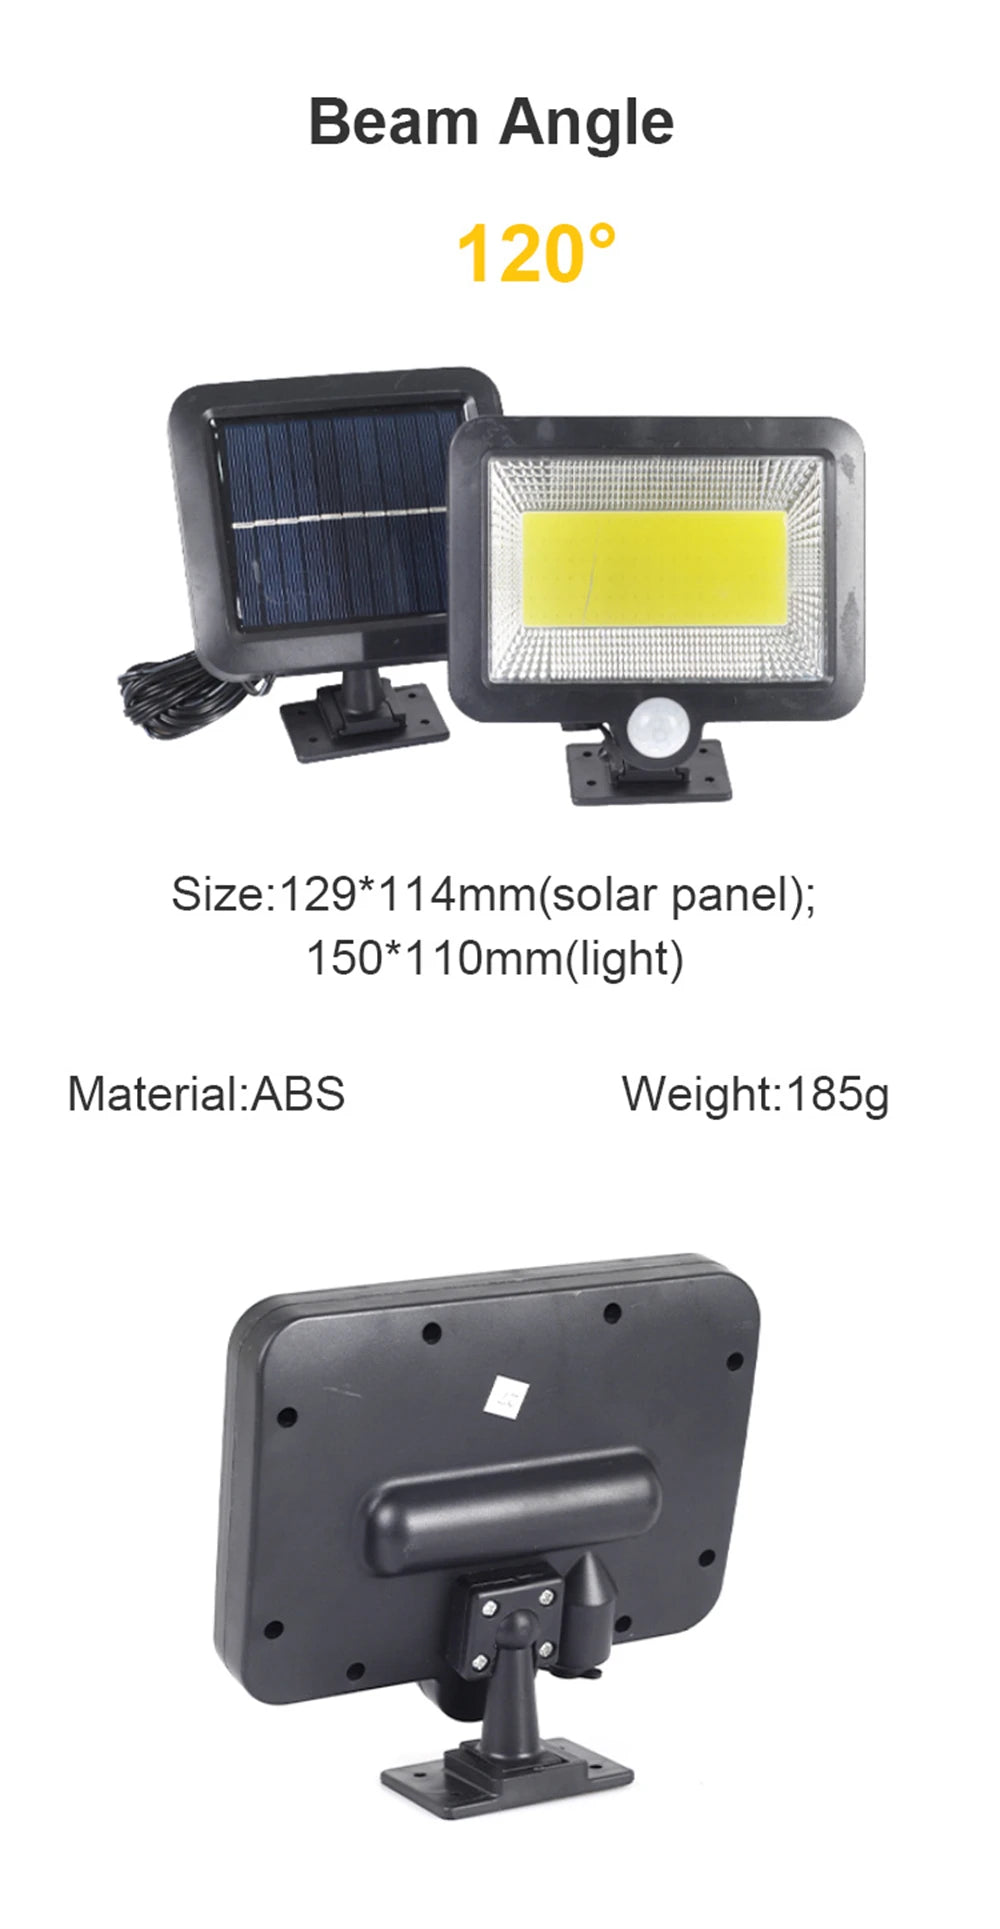 COB LED Solar Powered Light, Compact solar panel and light unit made from ABS plastic, weighing 185g.